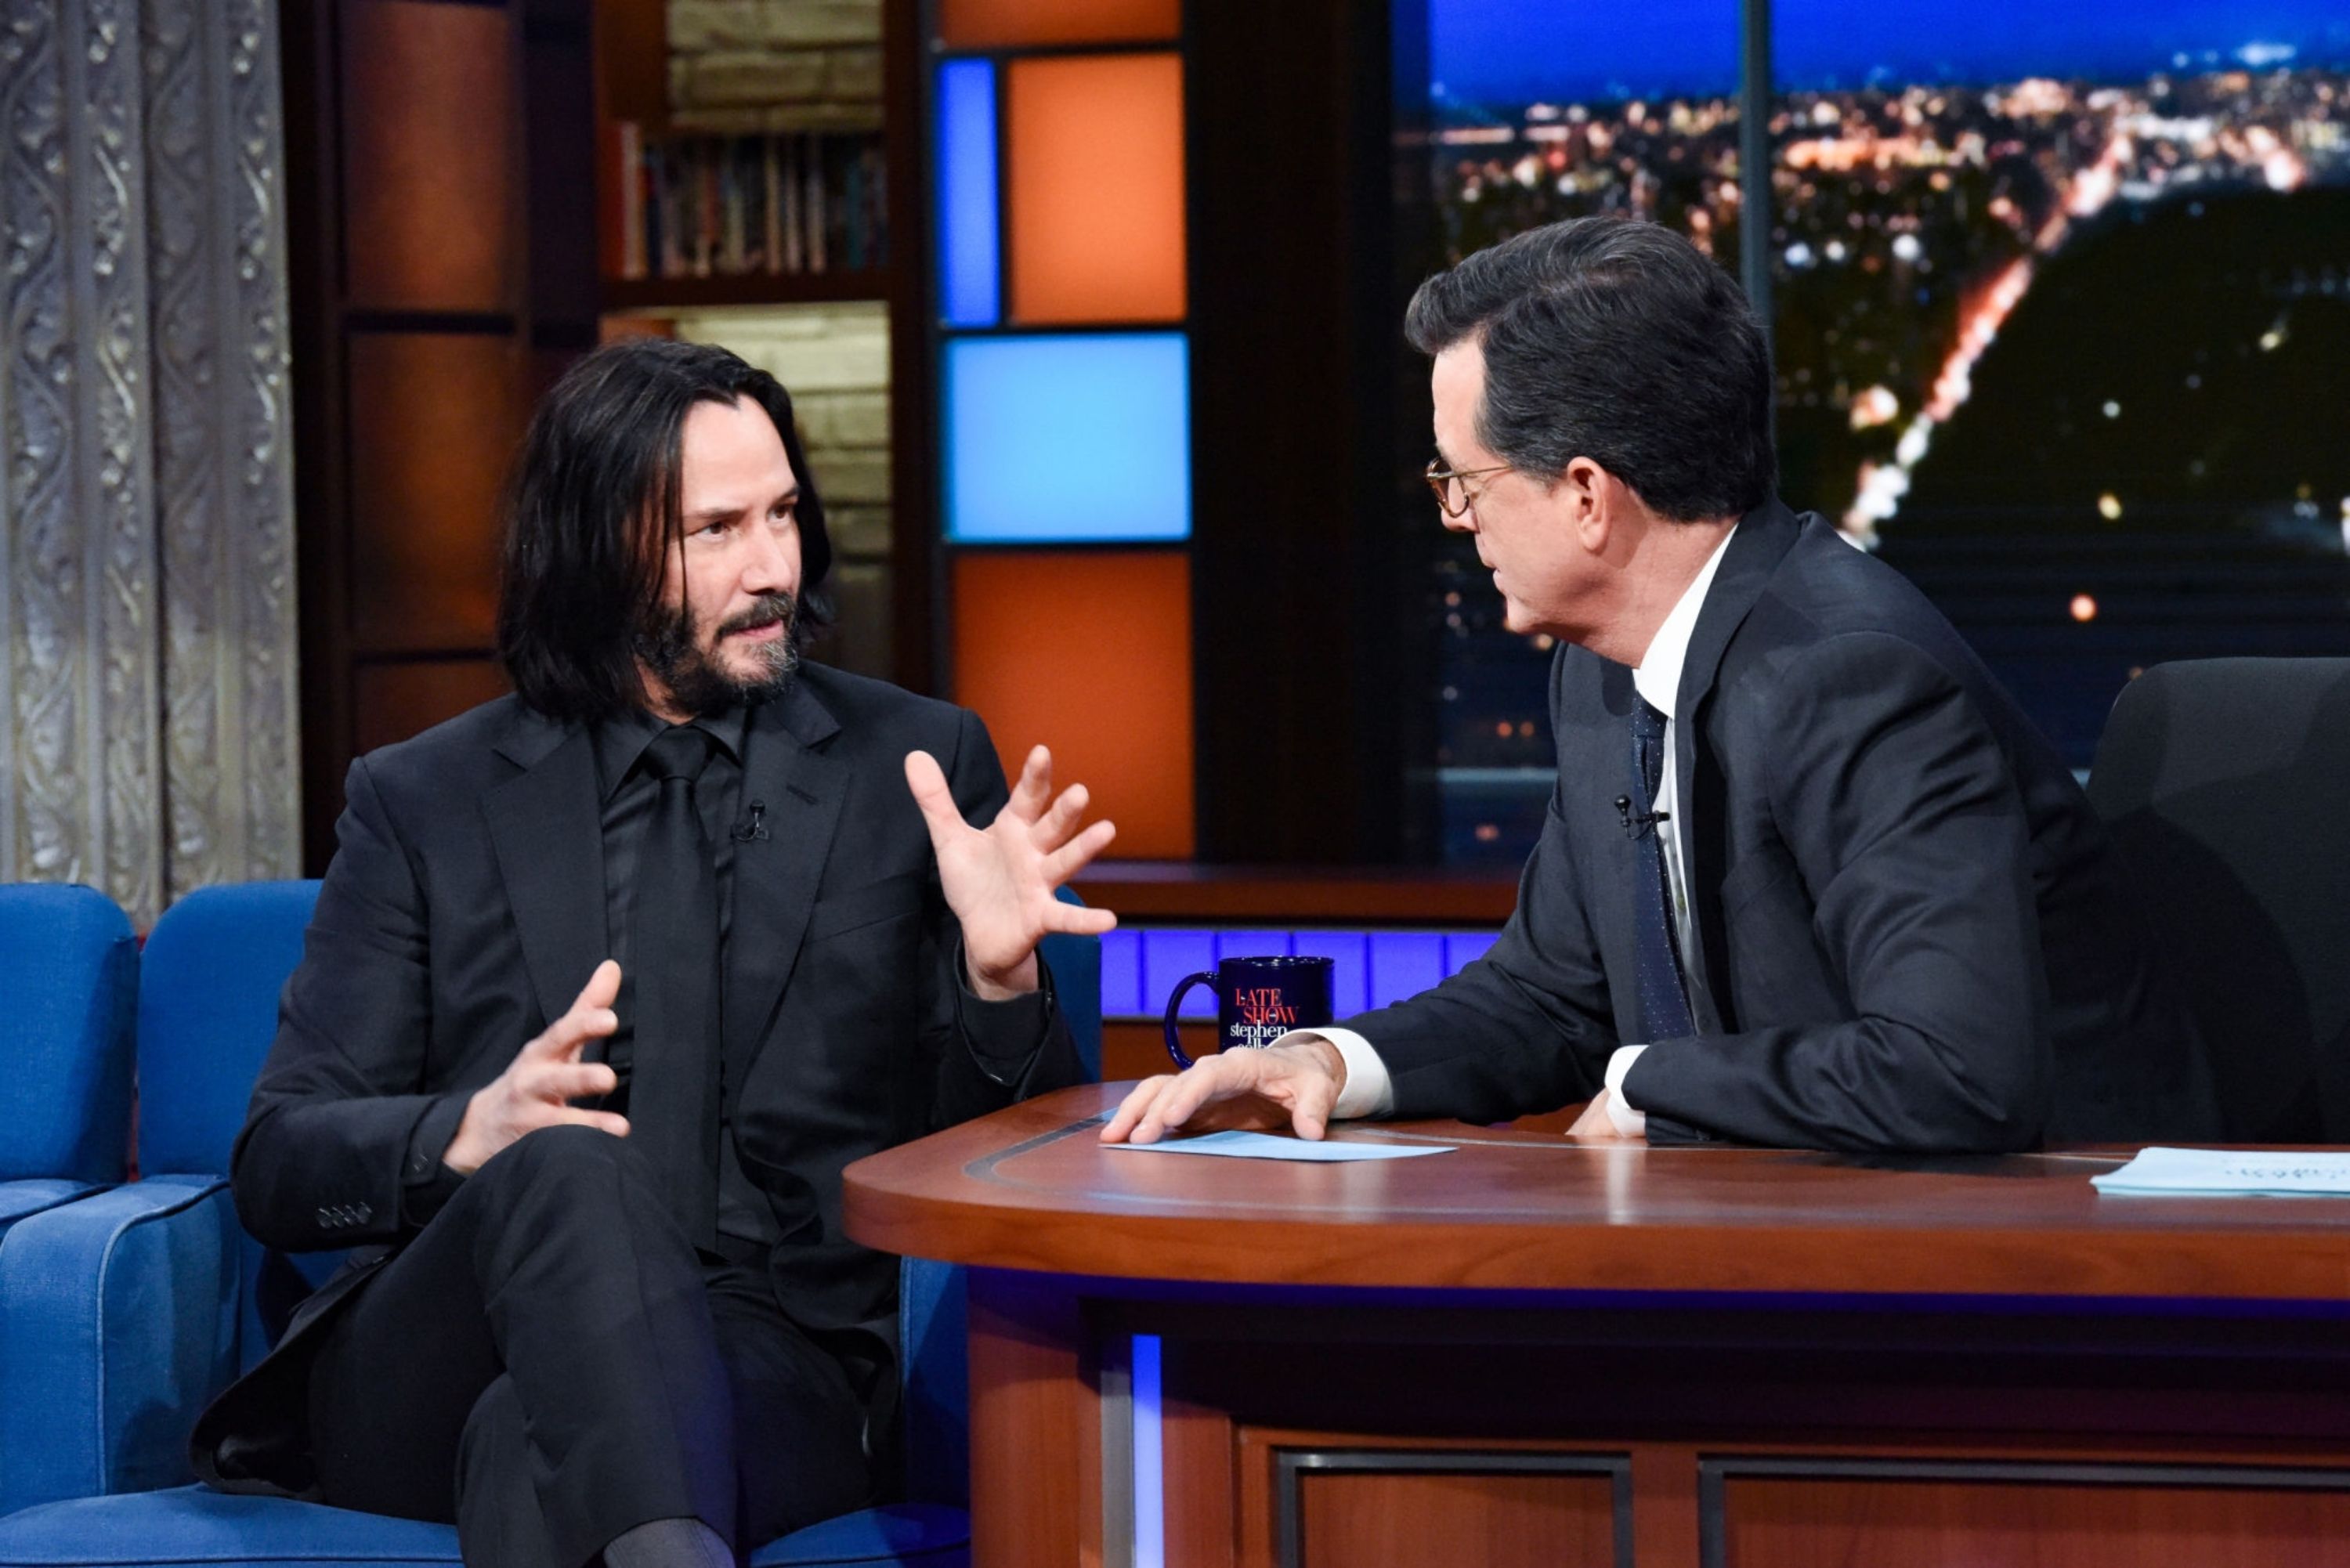 2019-05-08-The-Late-Show-With-Stephen-Colbert-Stills-003.jpg